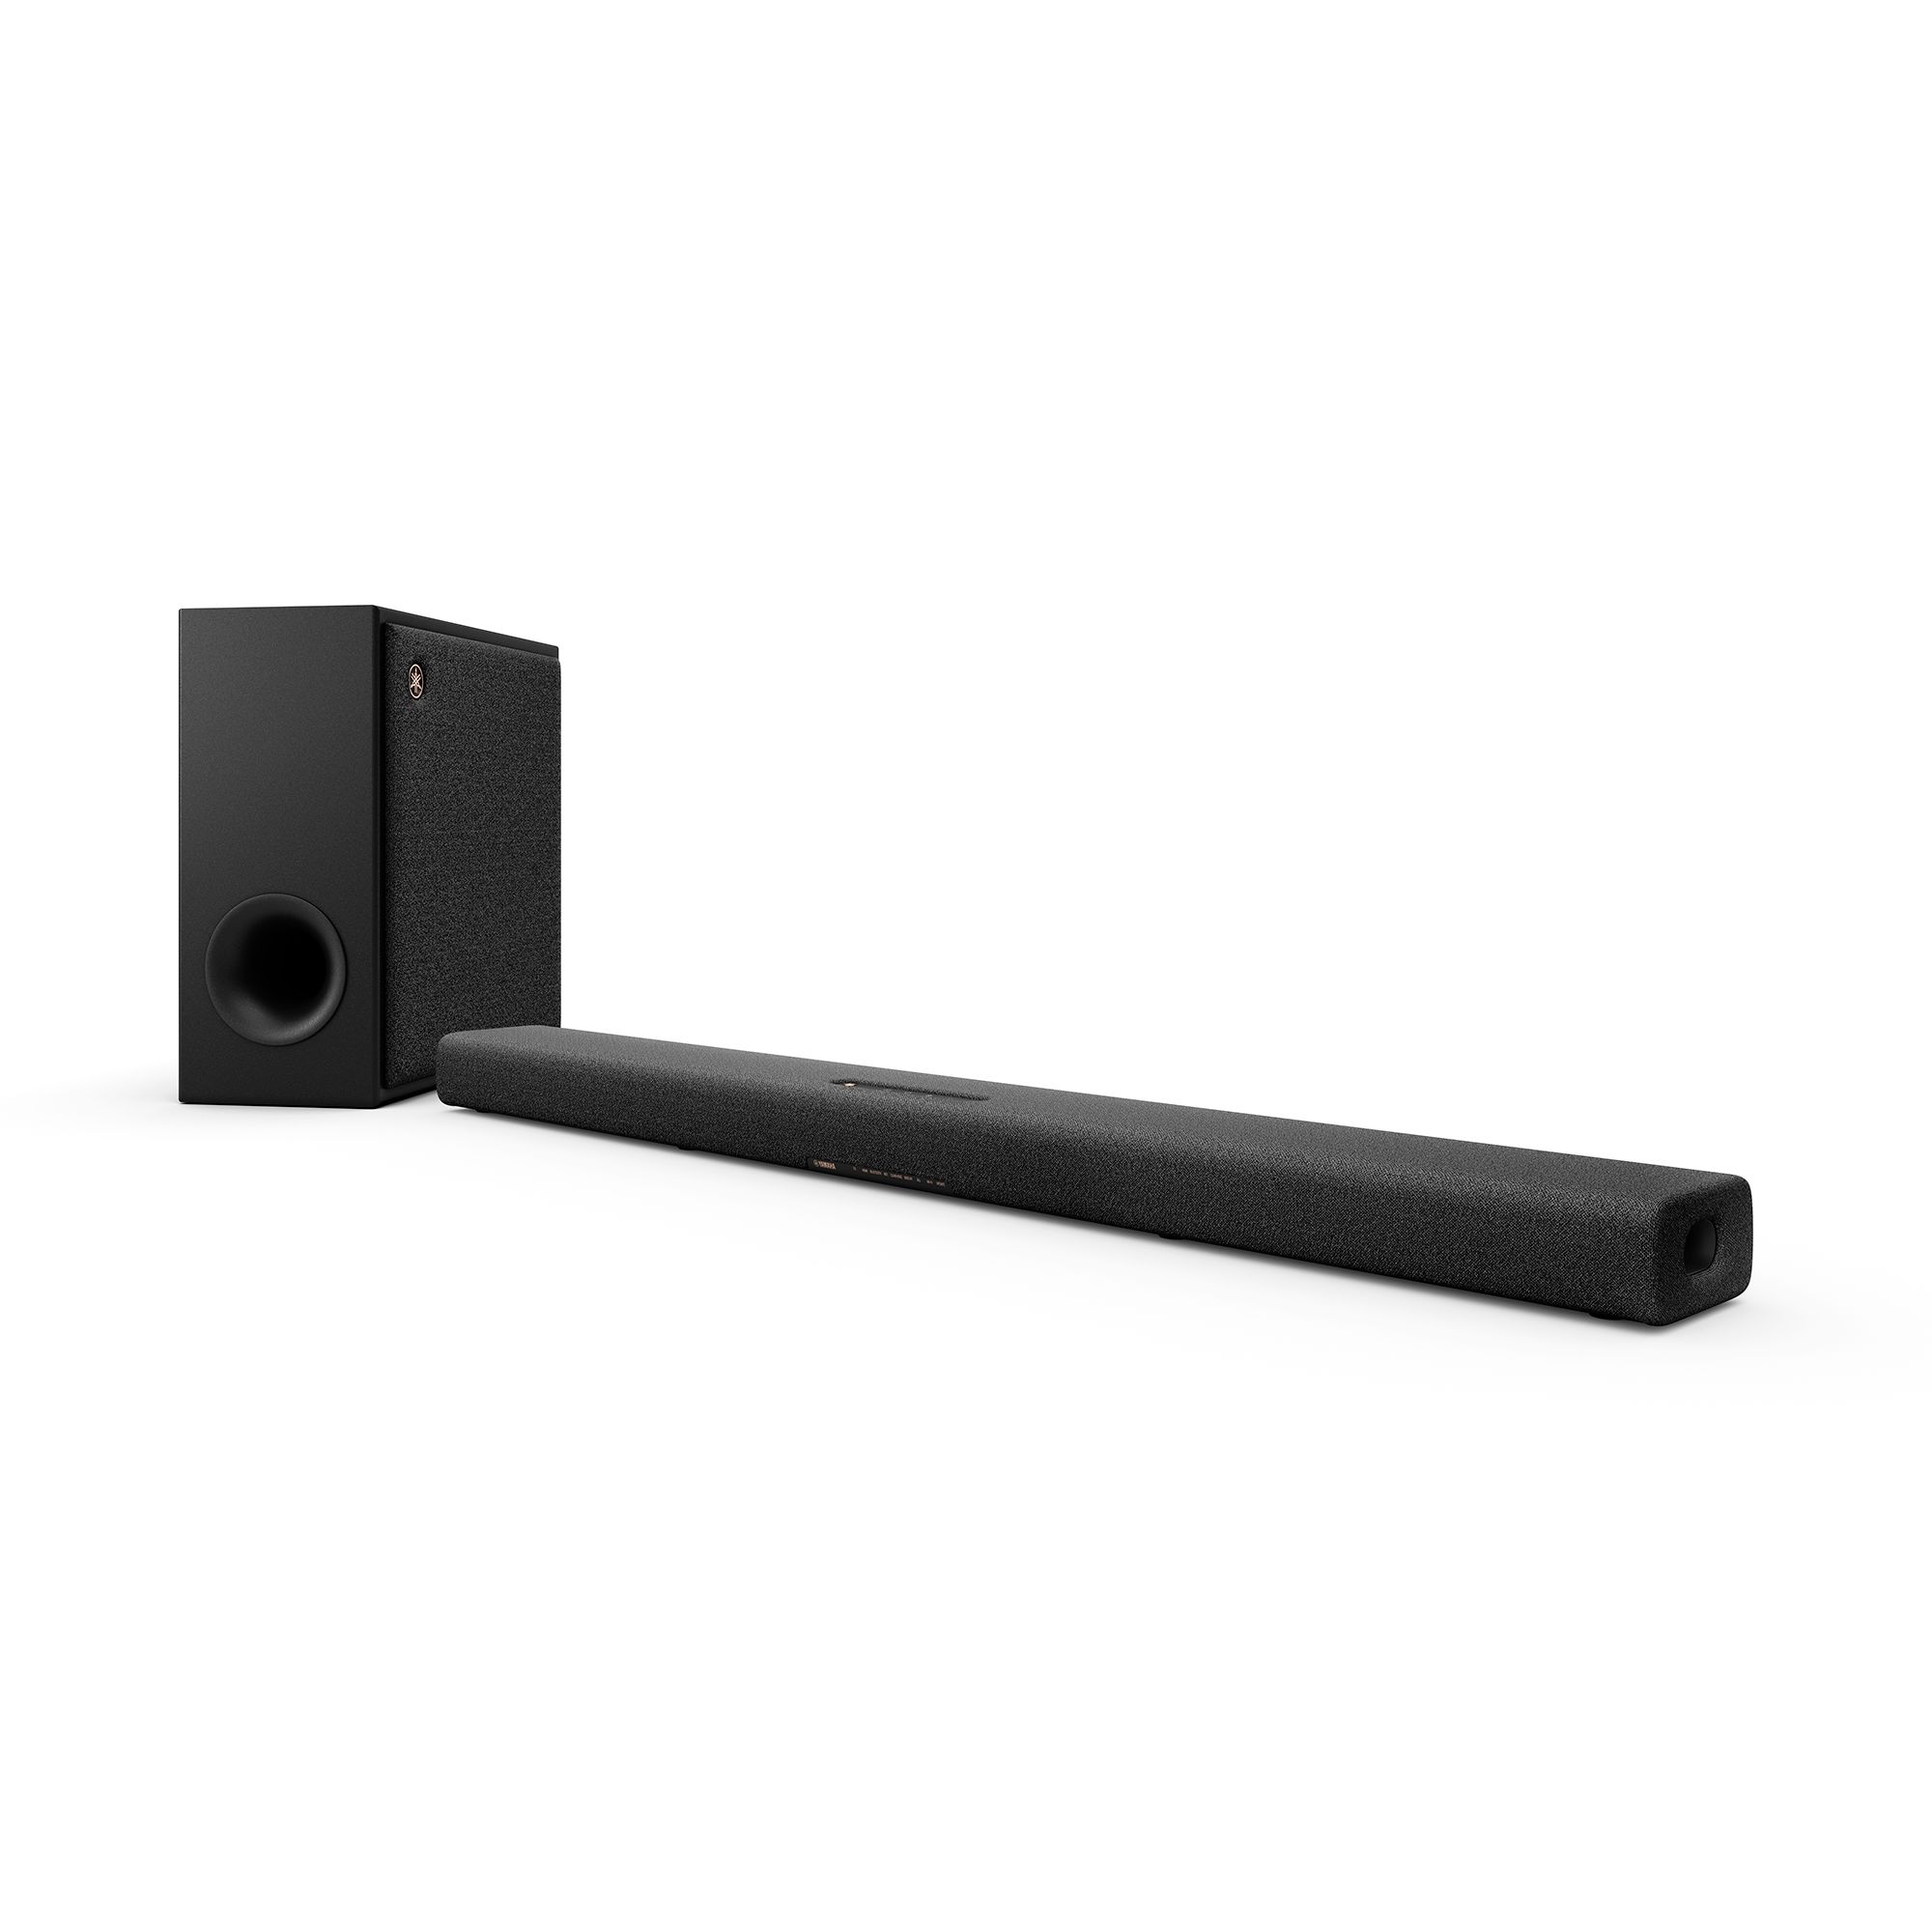 TRUE X BAR 50A - Overview - Sound Bars - Audio & Visual - Products 